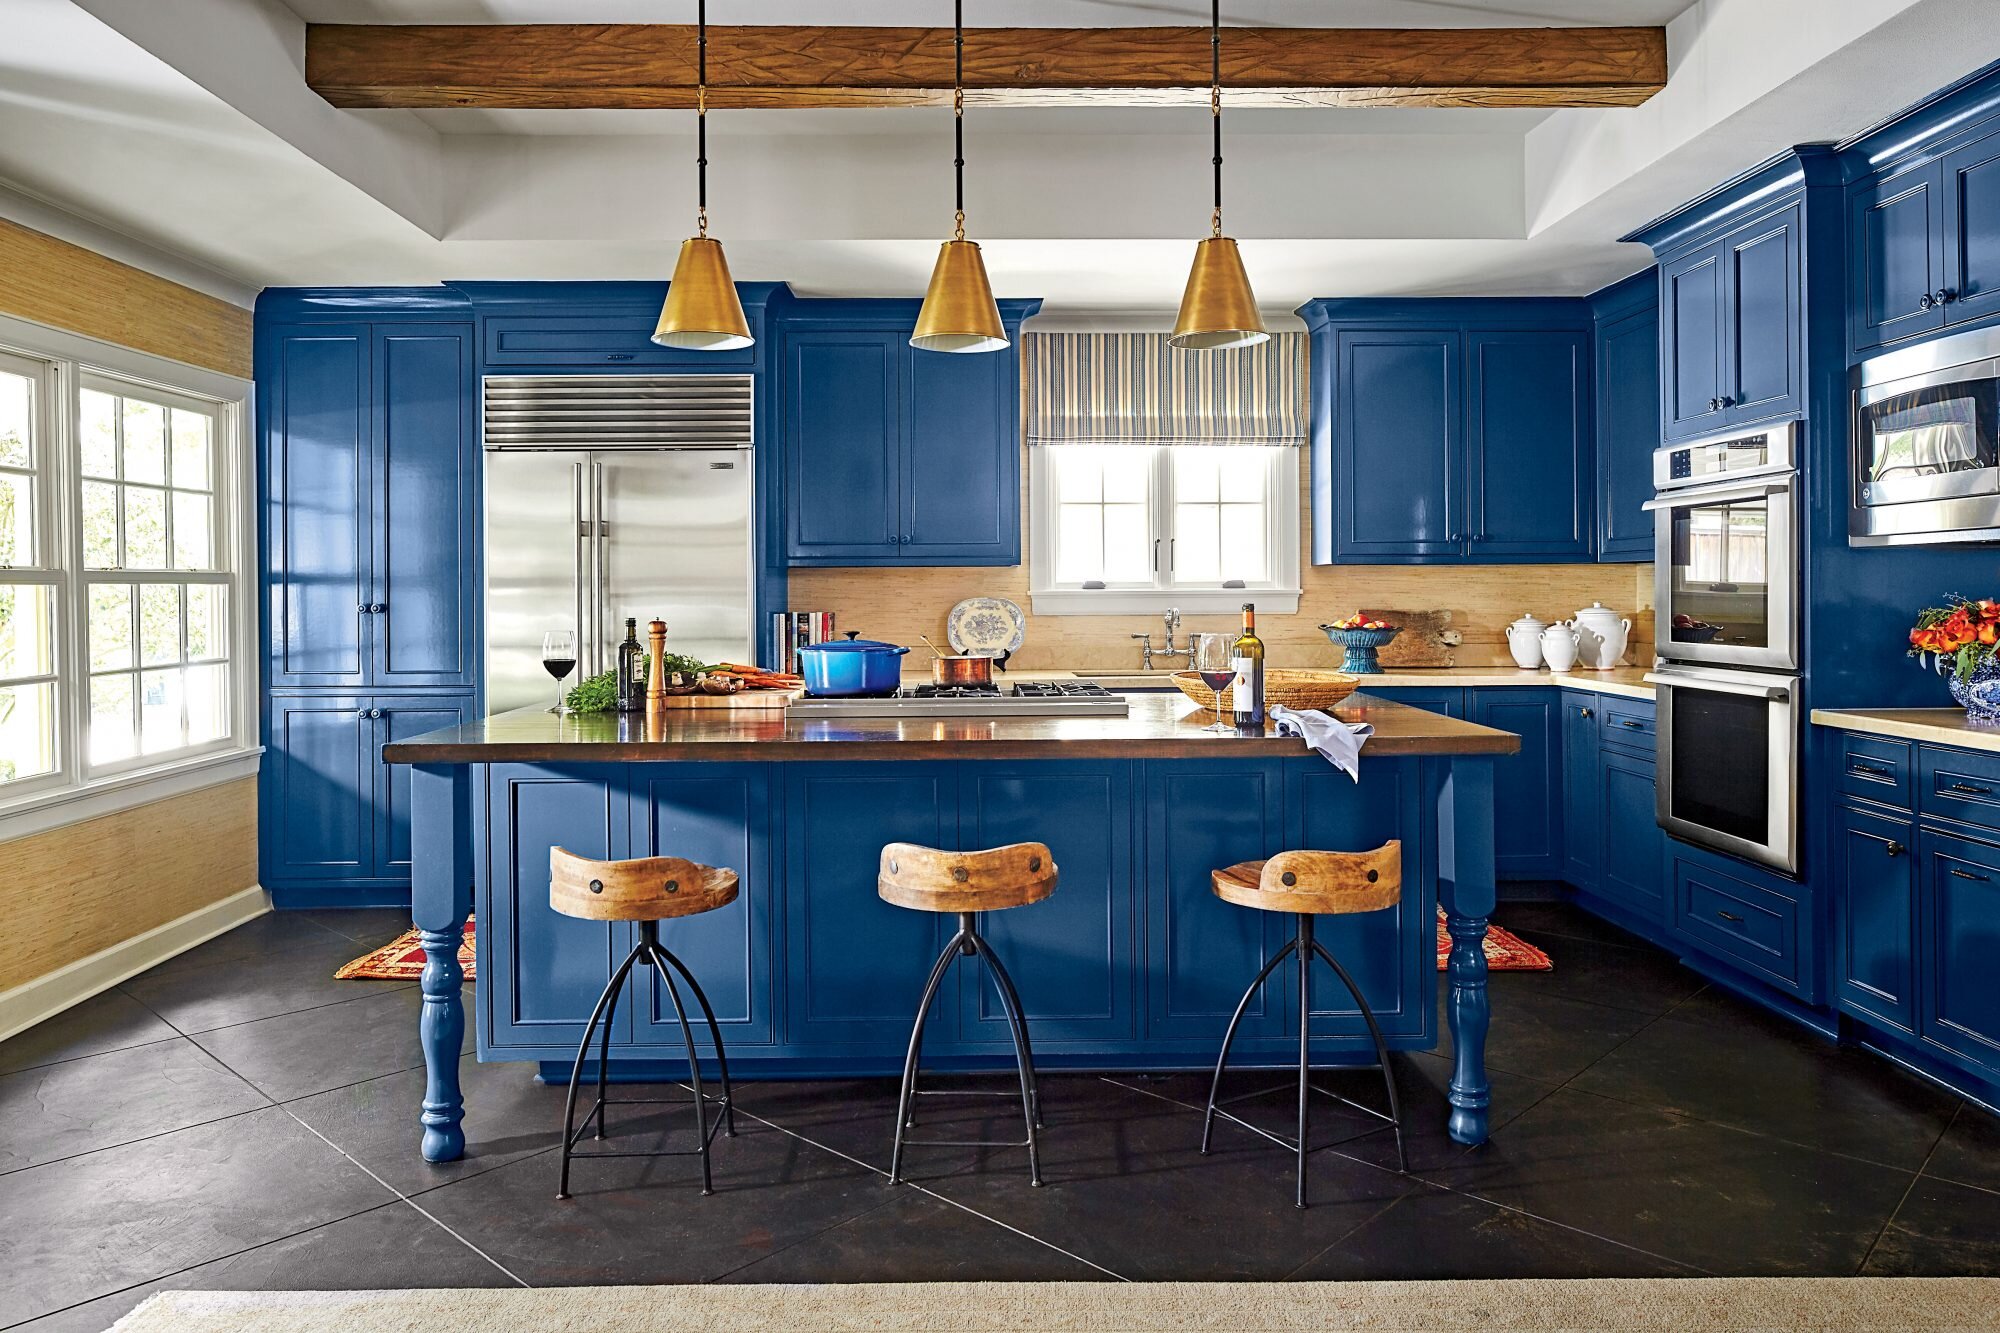 https://thecabinetdoctors.com/wp-content/uploads/2014/08/blue-kitchen-cabinets-southern-living.jpeg